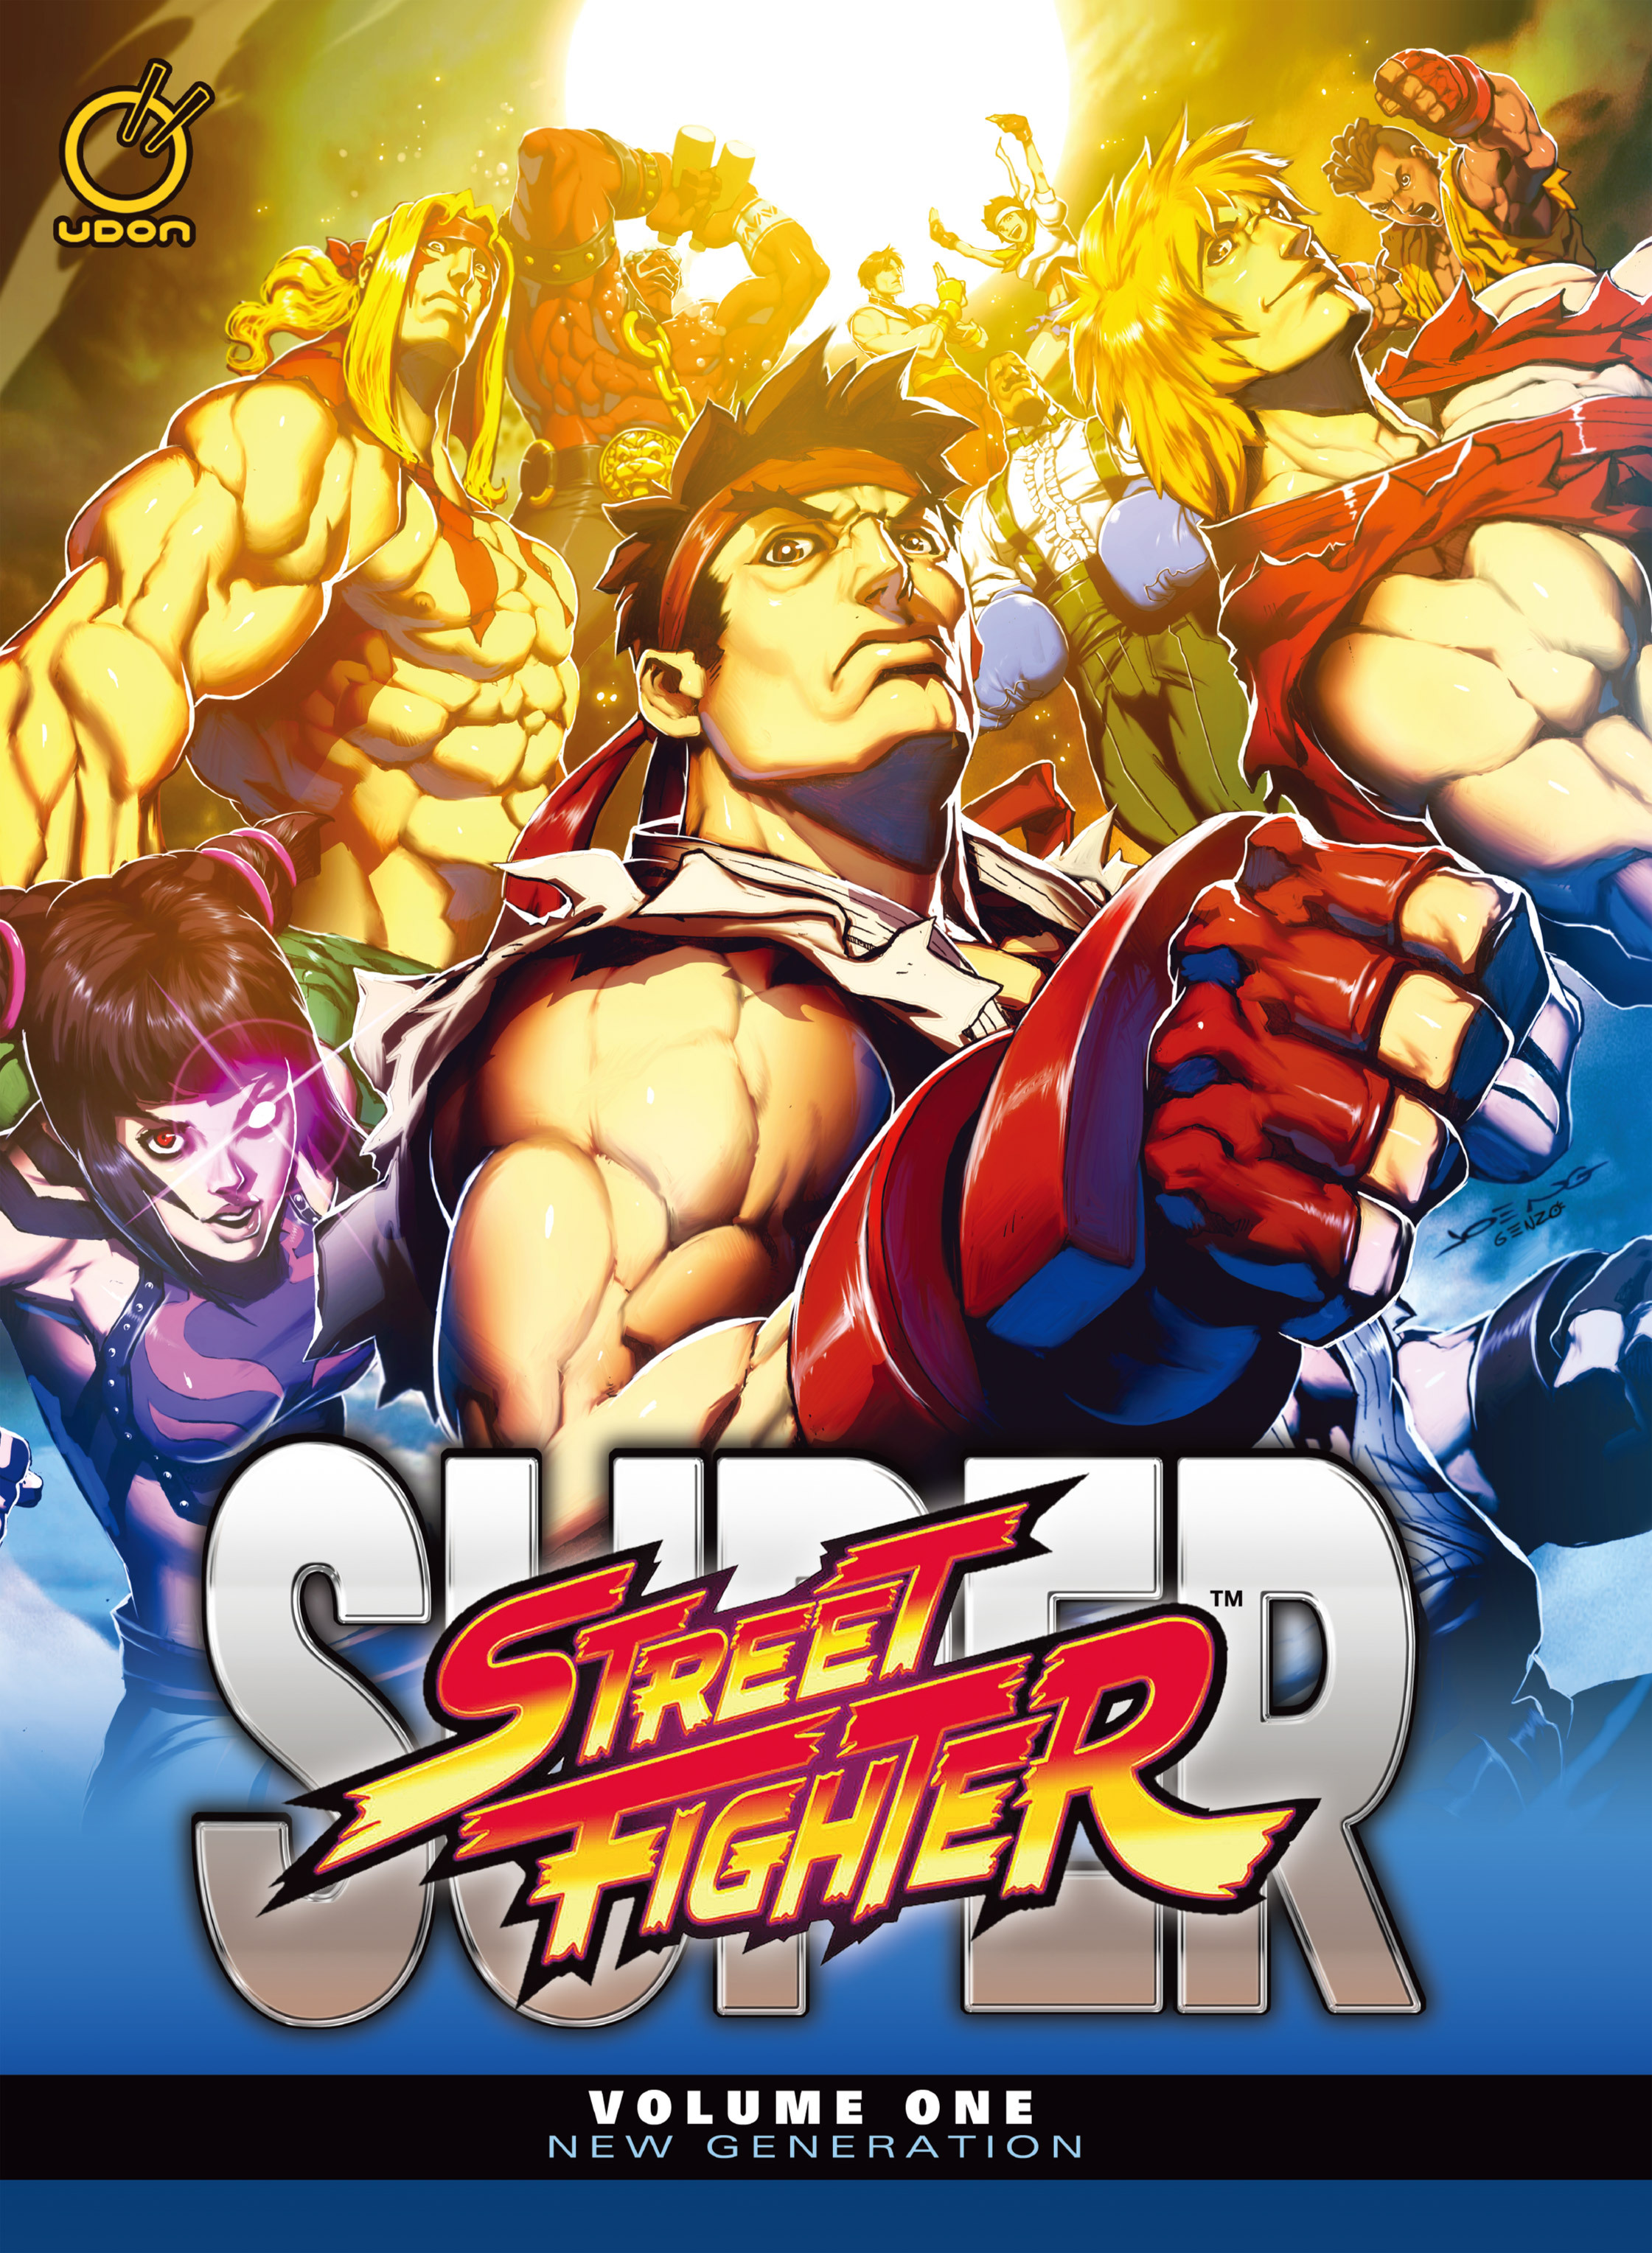 Read online Super Street Fighter comic -  Issue # Vol.1 - New Generations - 1